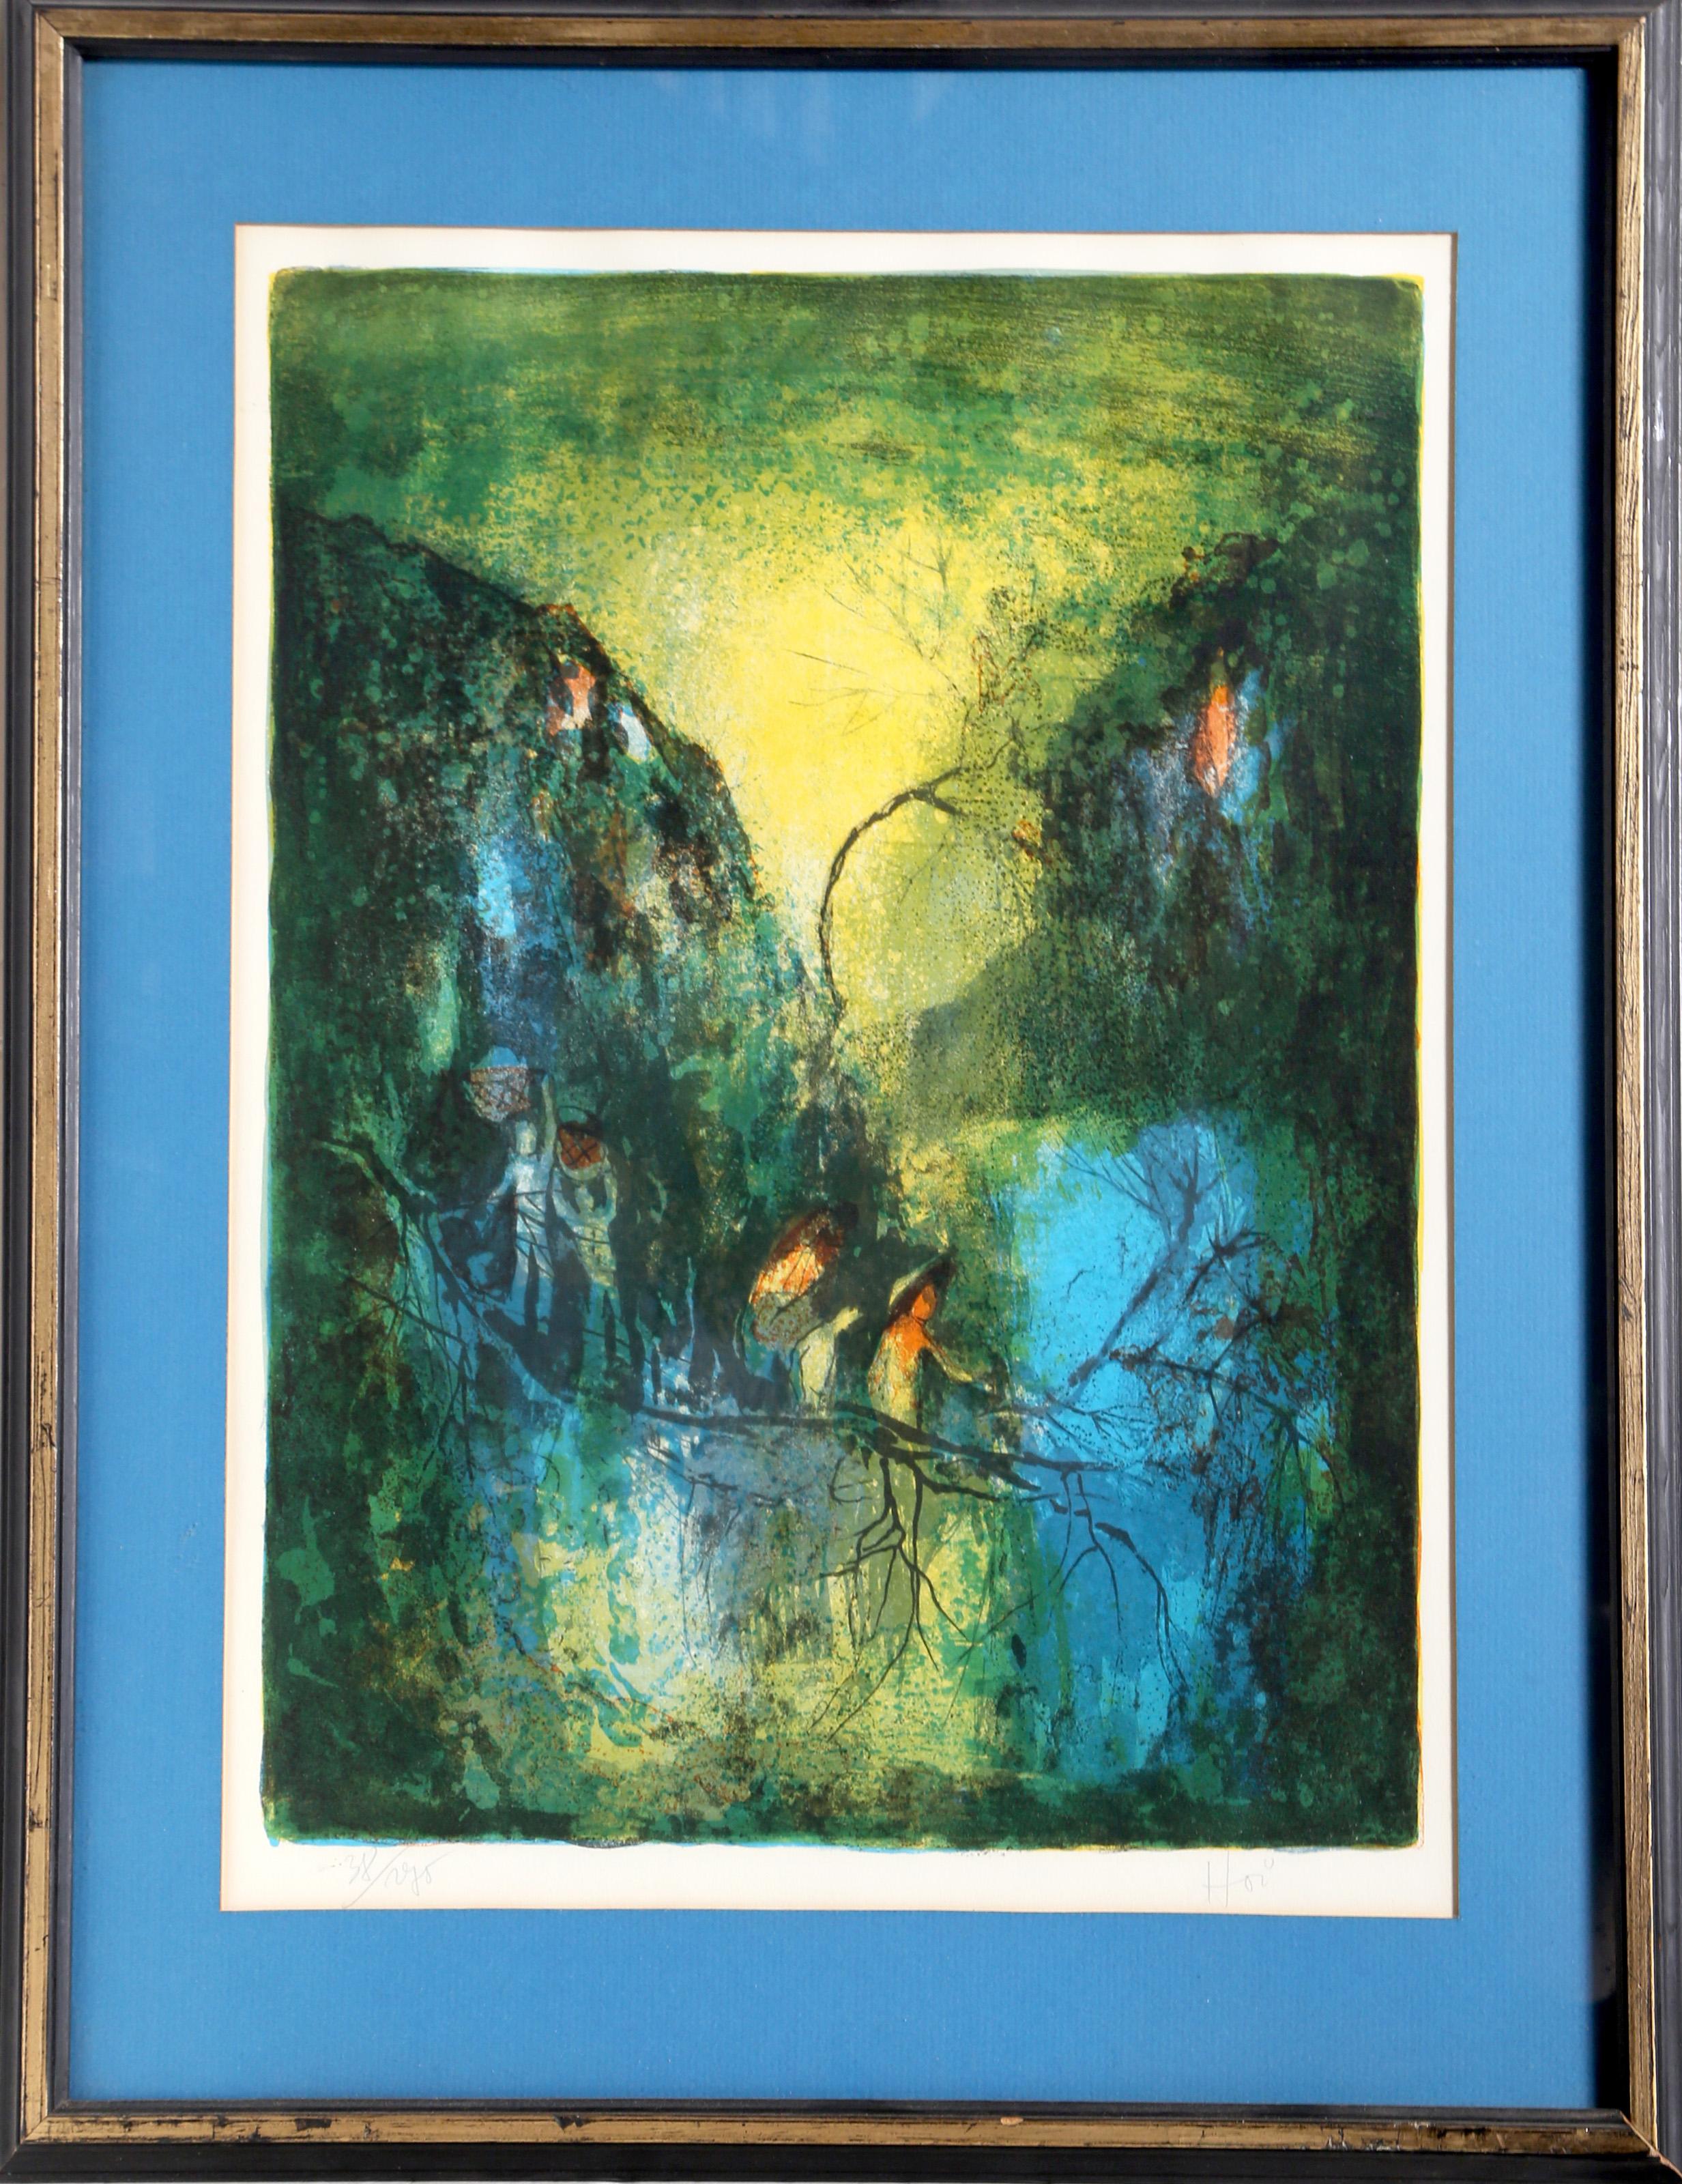 Lebadang (aka Hoi), Vietnamese (1922 - 2015) -  Crossing Bridge. Year: circa 1970, Medium: Lithograph, signed Hoi and numbered in pencil, Edition: 38/250, Image Size: 21.25 x 16 inches, Frame Size: 29.5 x 24 inches 